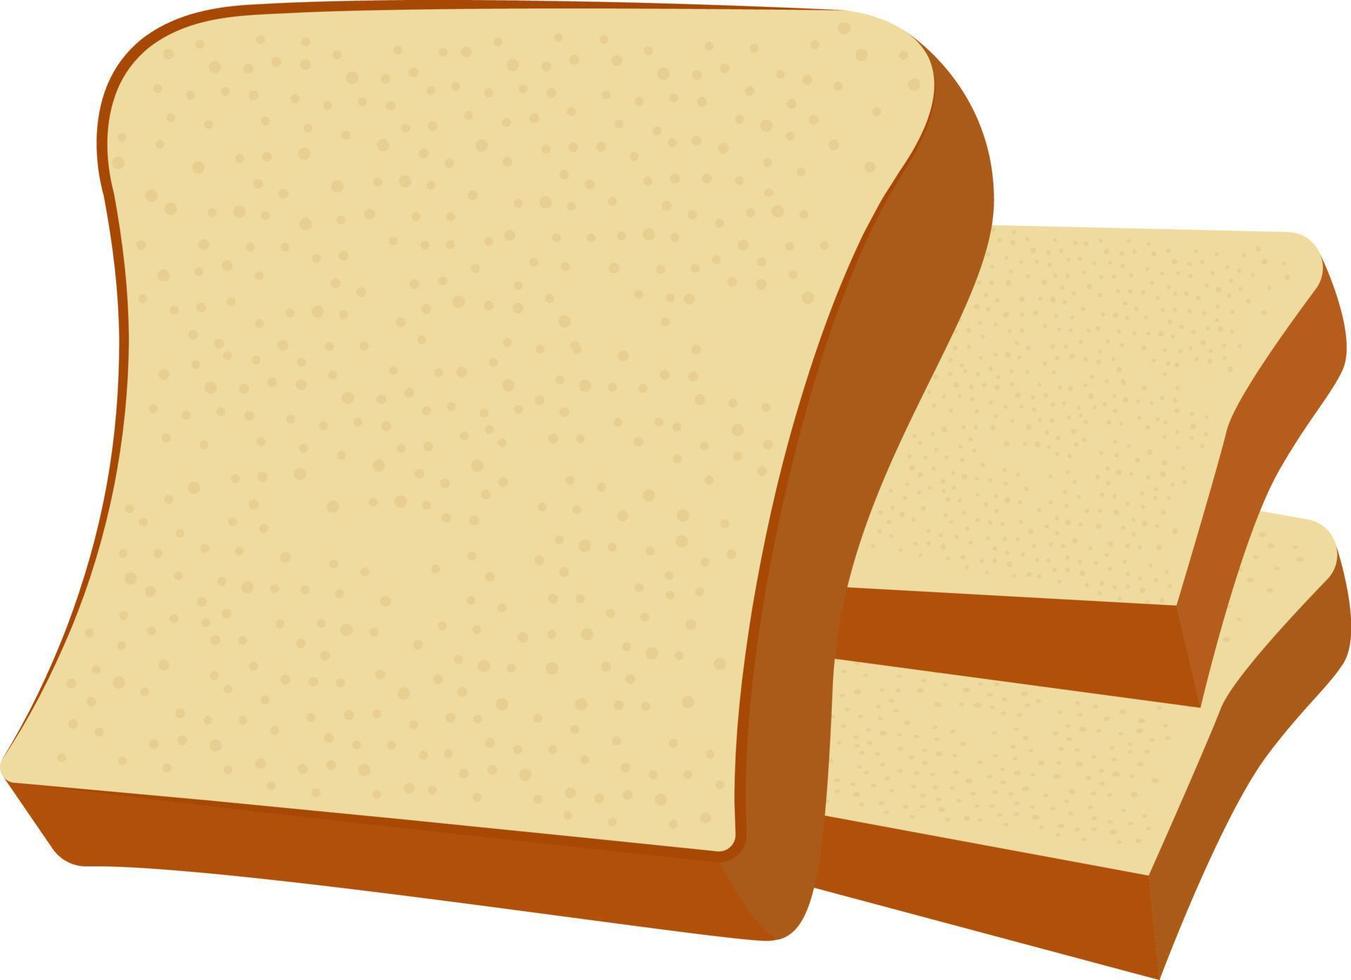 Tost bread, illustration, vector on a white background.